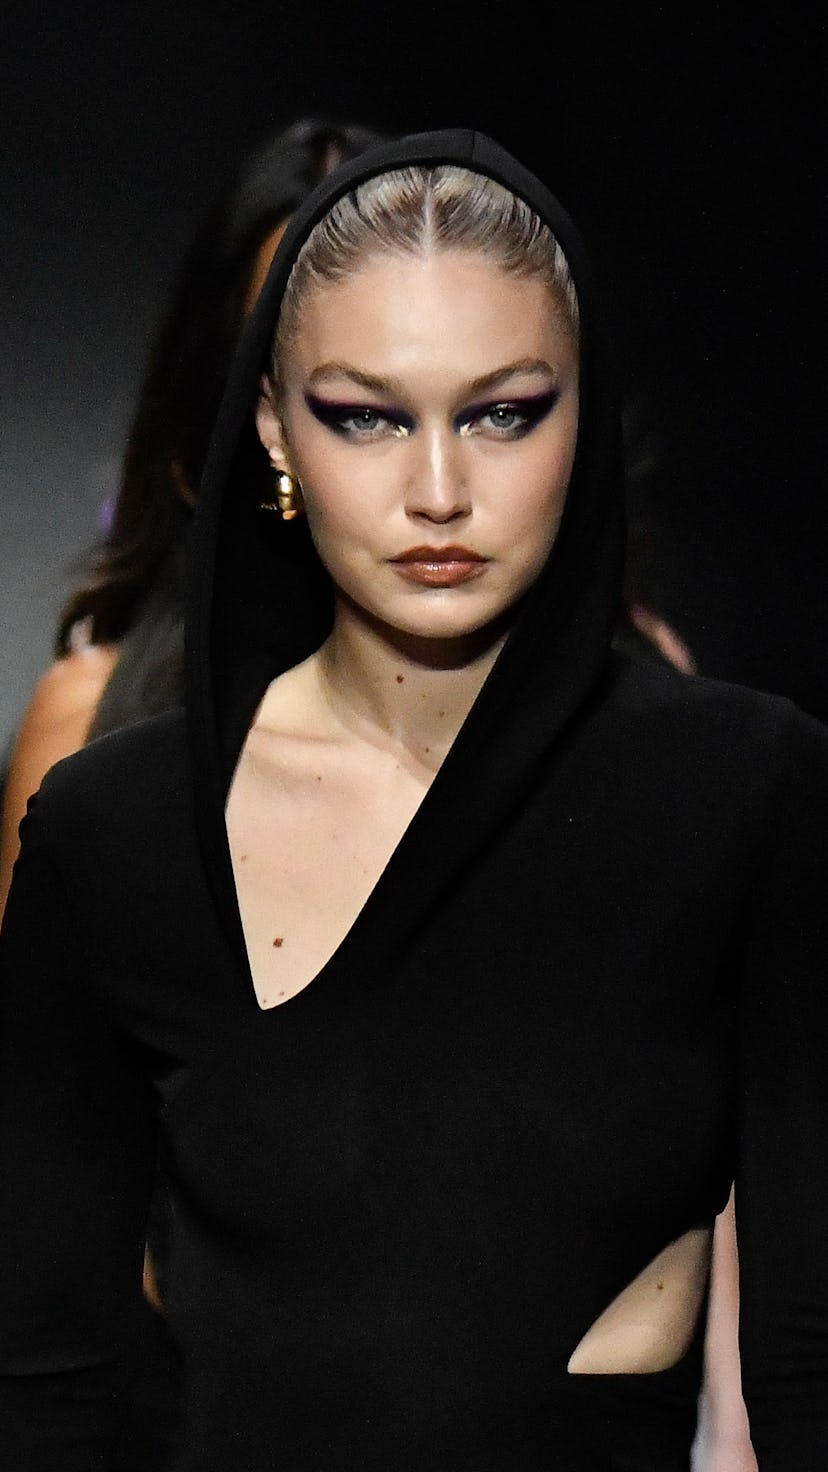 MILAN, ITALY - SEPTEMBRE 23: Gigi Hadid walks the runway during the Versace Ready to Wear Spring/Sum...